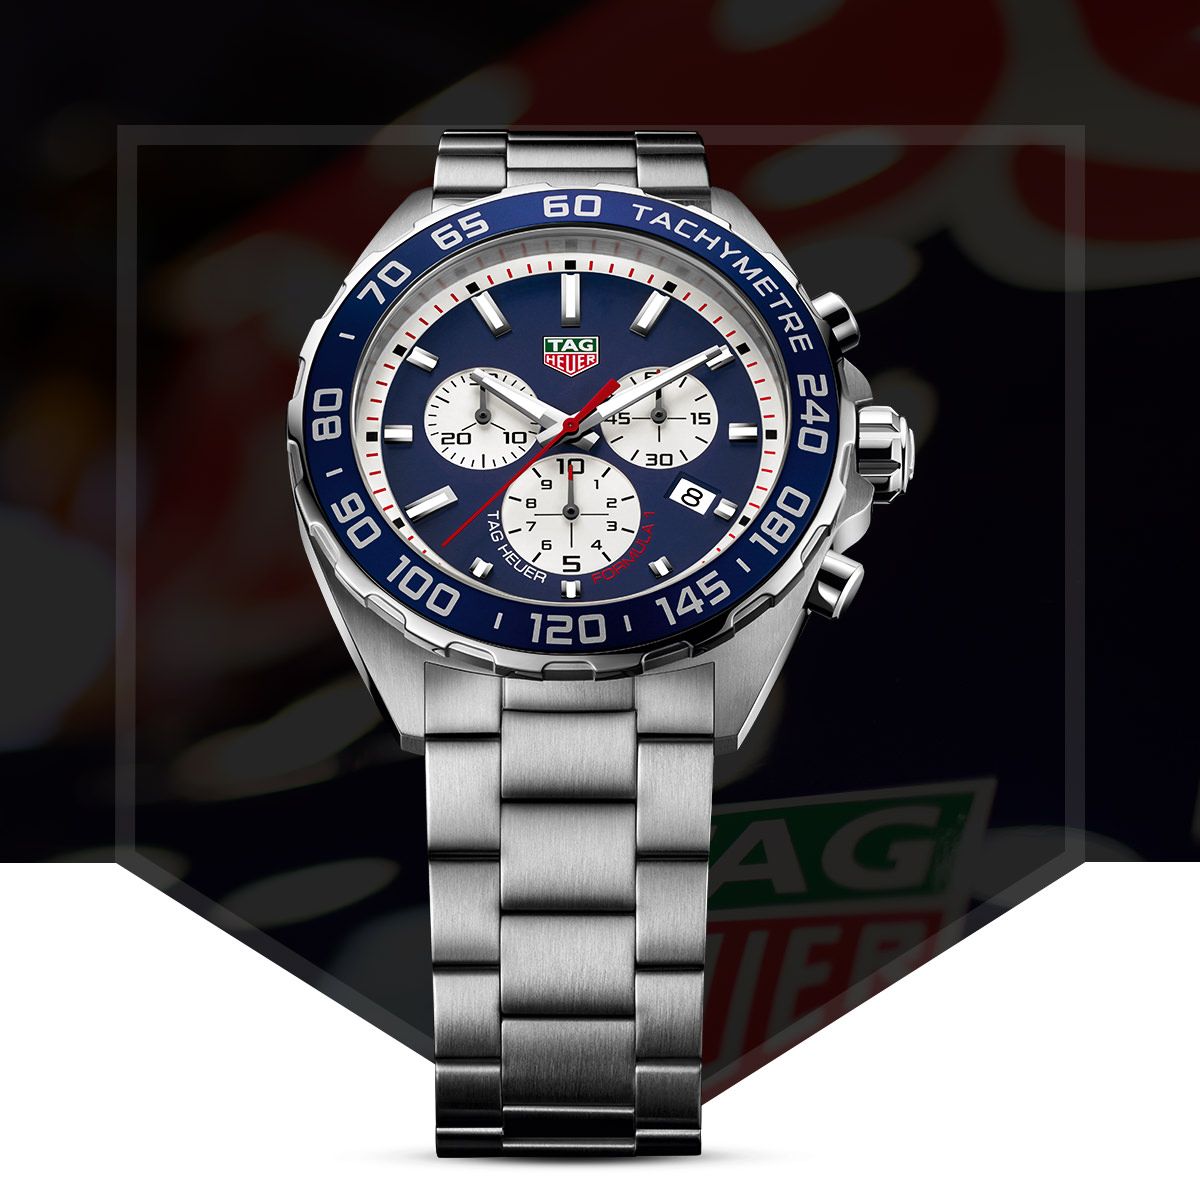 eliminar Influencia Pais de Ciudadania The TAG Heuer Red Bull Watch - Hands on Review and Price in India